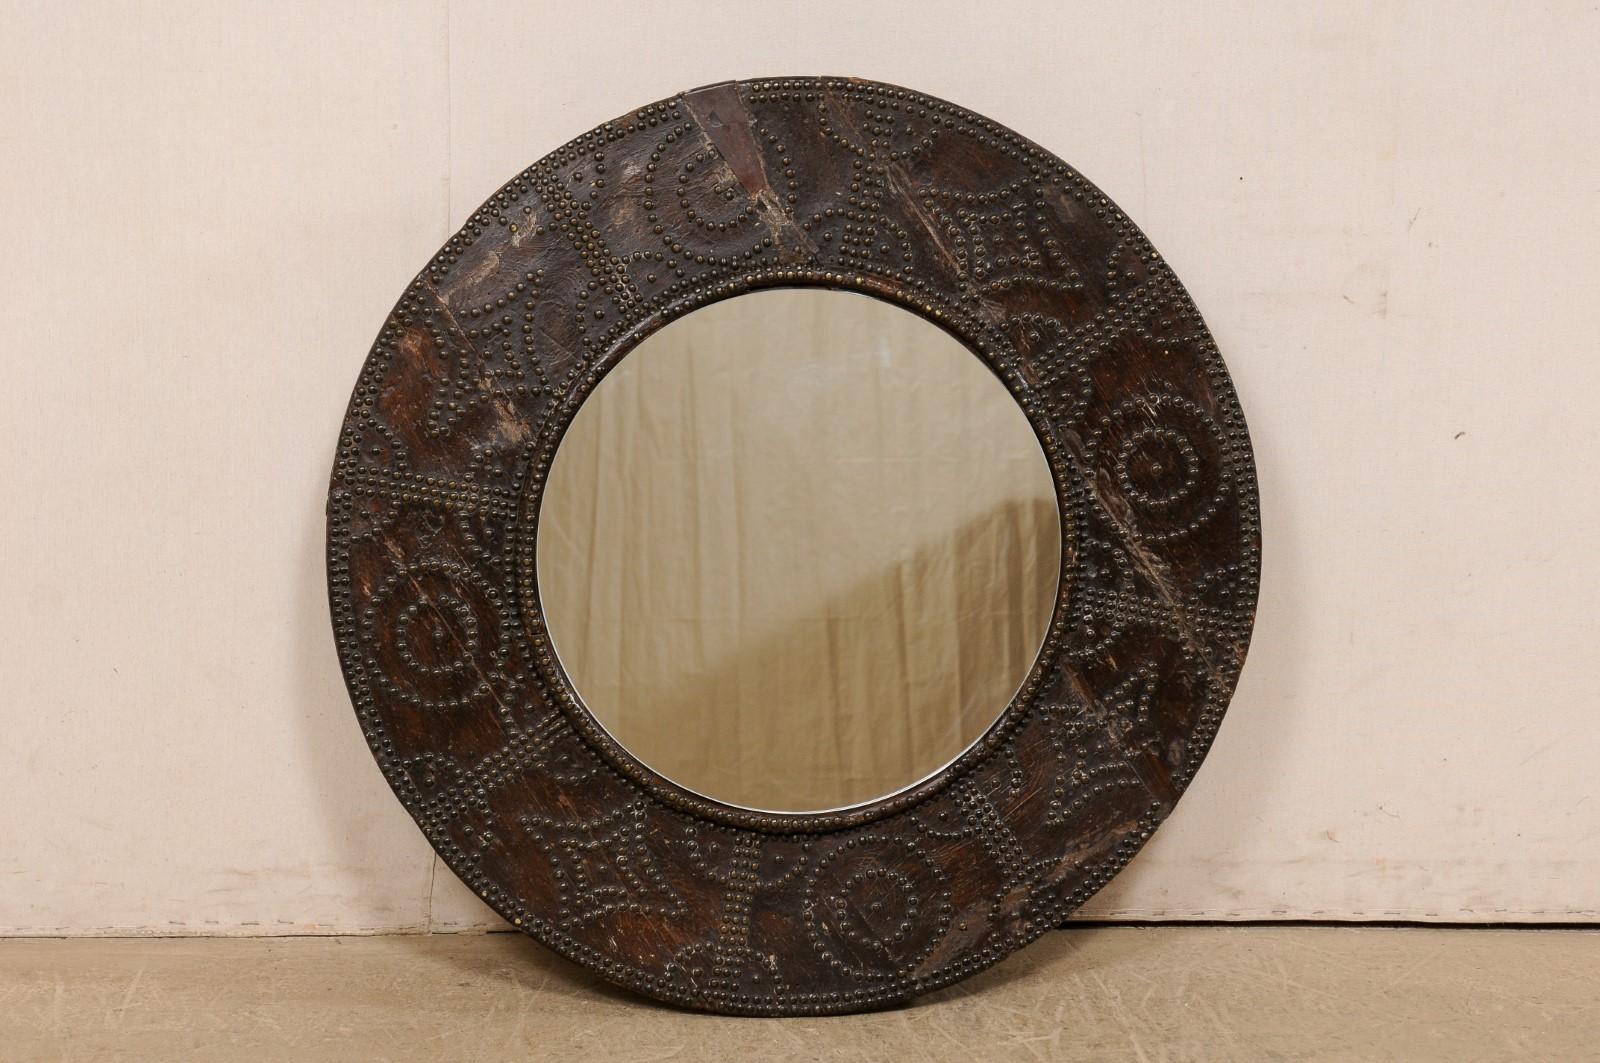 A Spanish mirror, with brazier surround from the turn of the 19th and 20th century. This unique circular mirror which has been custom fashioned with an antique Spanish wooden brazier (beautifully adorn with a nail-head design) as the surround, with